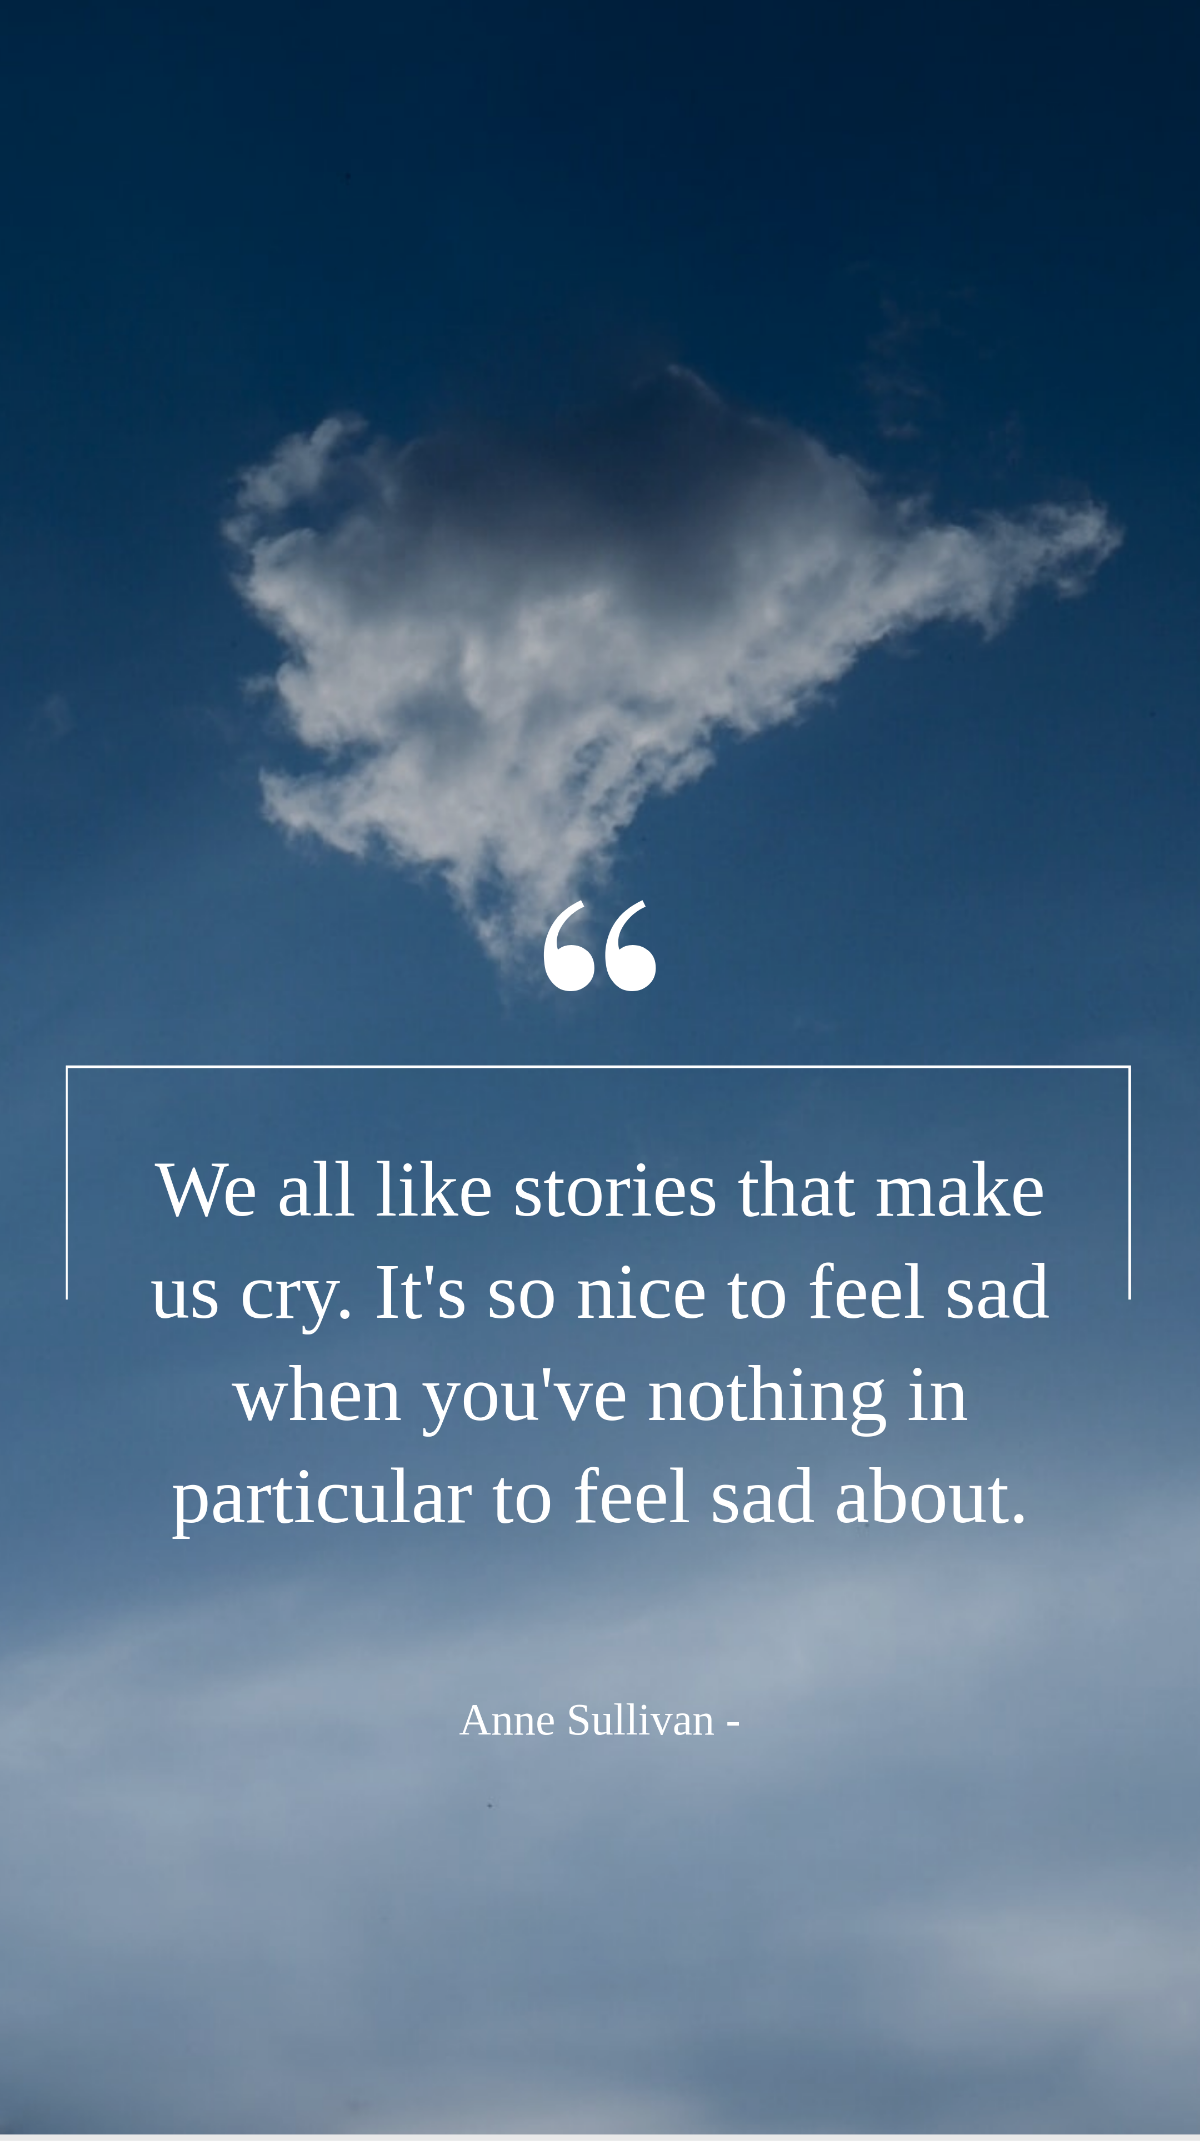 Anne Sullivan - We all like stories that make us cry. It's so nice to feel sad when you've nothing in particular to feel sad about. Template